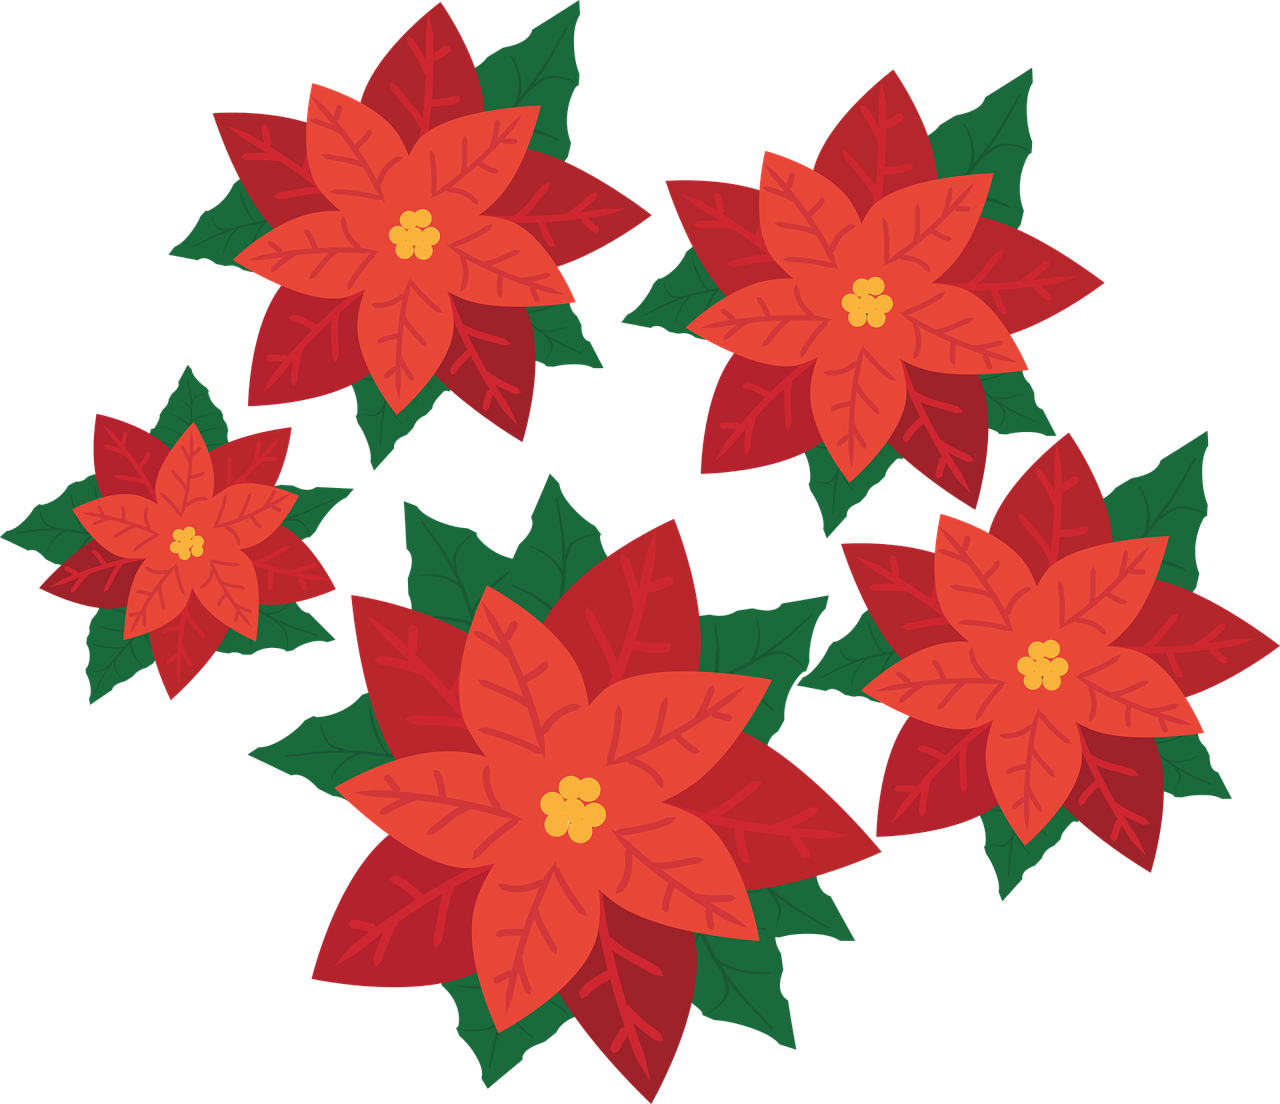 a bunch of red poinsettis with green leaves, an illustration of, inspired by Masamitsu Ōta, cutie mark, on black background, illustration:.4, cut-scene